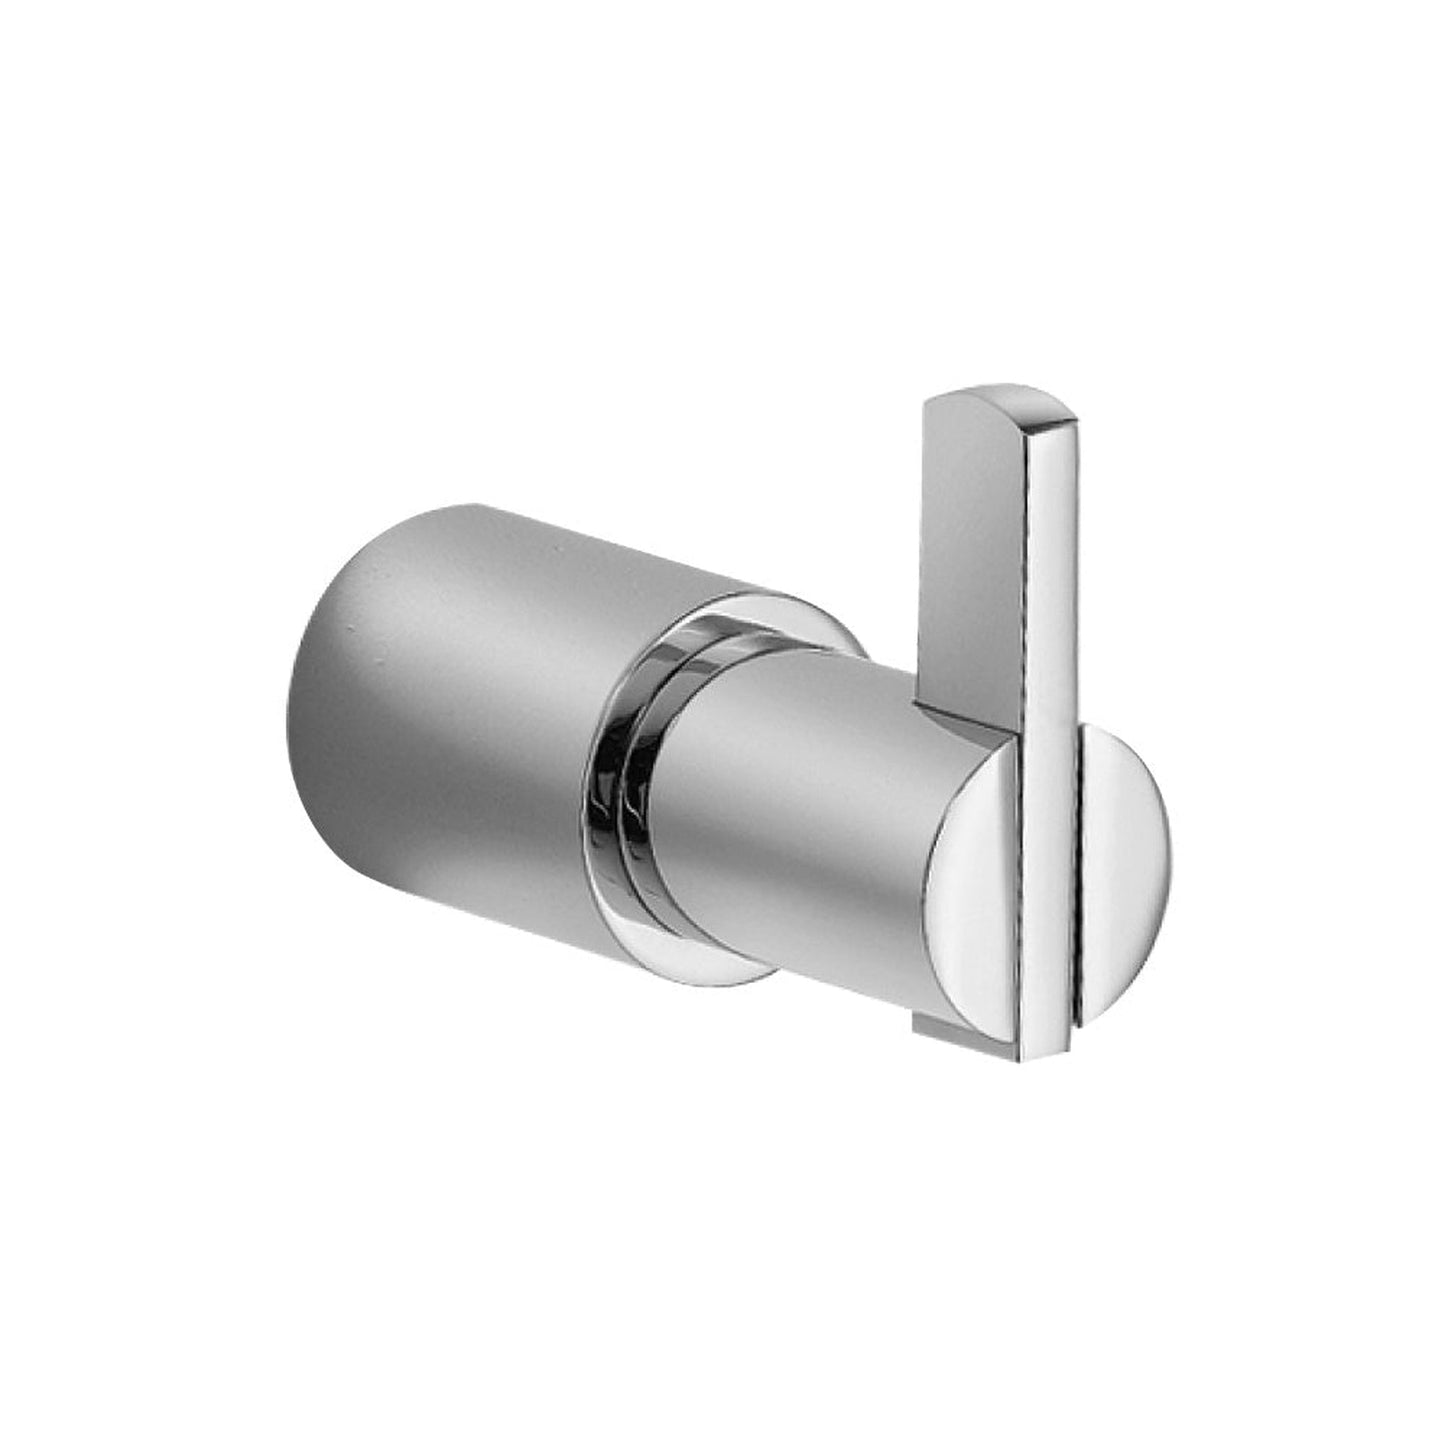 Isenberg Serie 145 2" Chrome Solid Brass Wall-Mounted Towel and Robe Hook